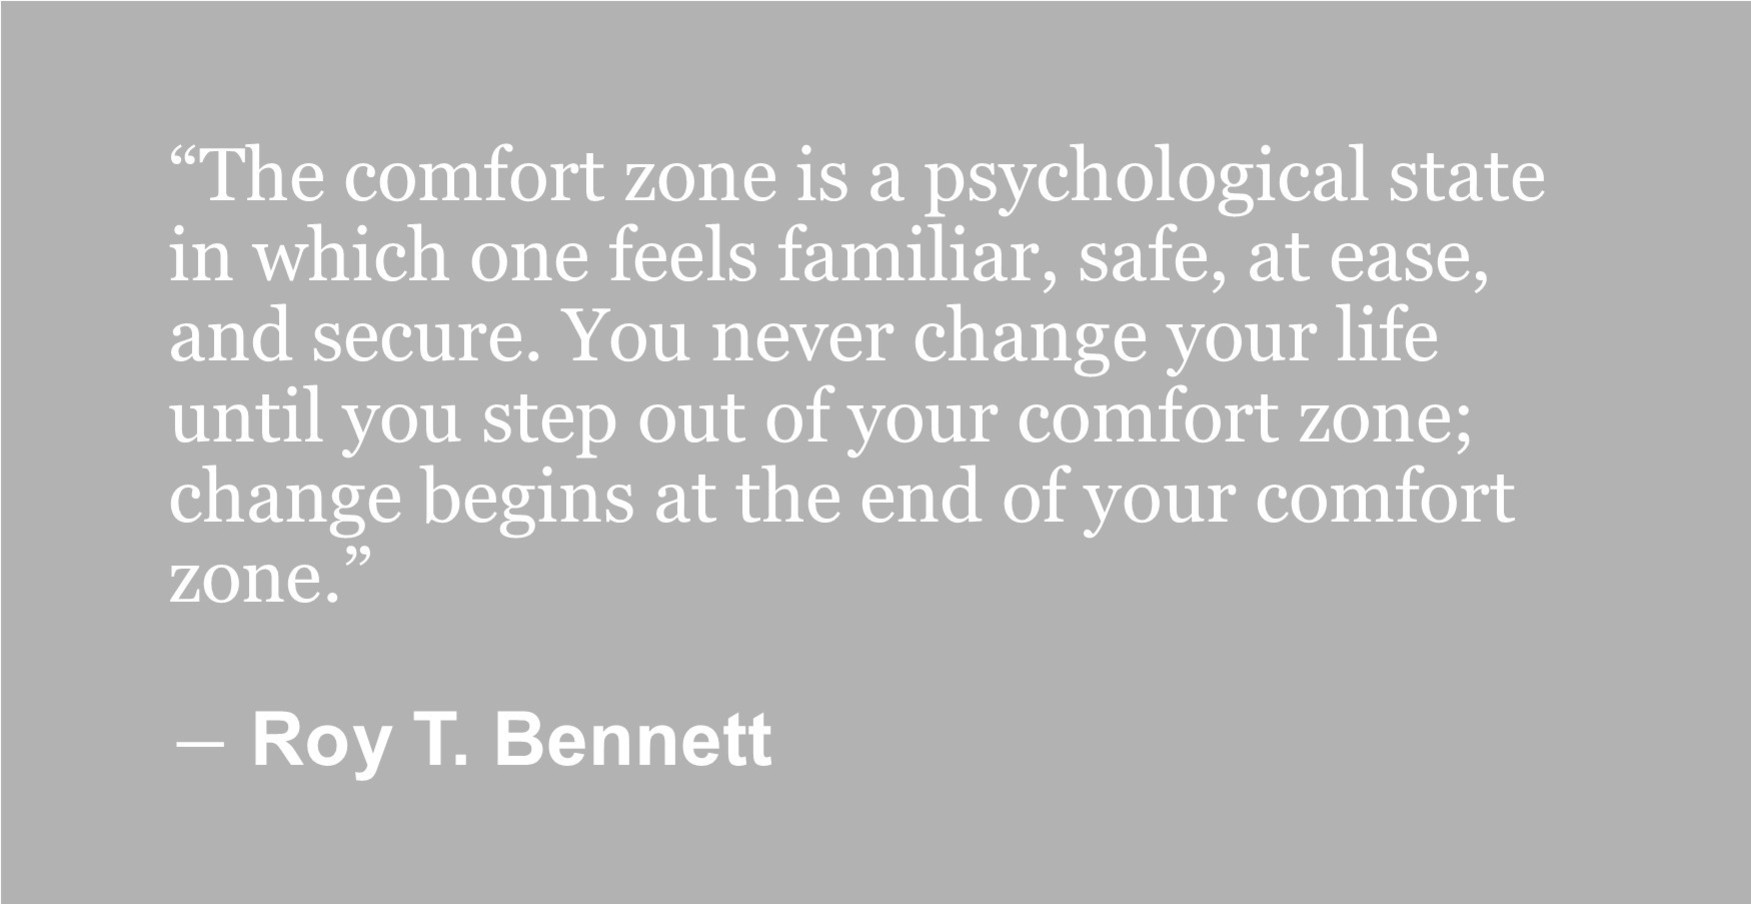 “The comfort zone is a psychological state in which one feels familiar, safe, at ease, and secure. You never change your life until you step out of your comfort zone; change begins at the end of your comfort zone.” ― Roy T. Bennett